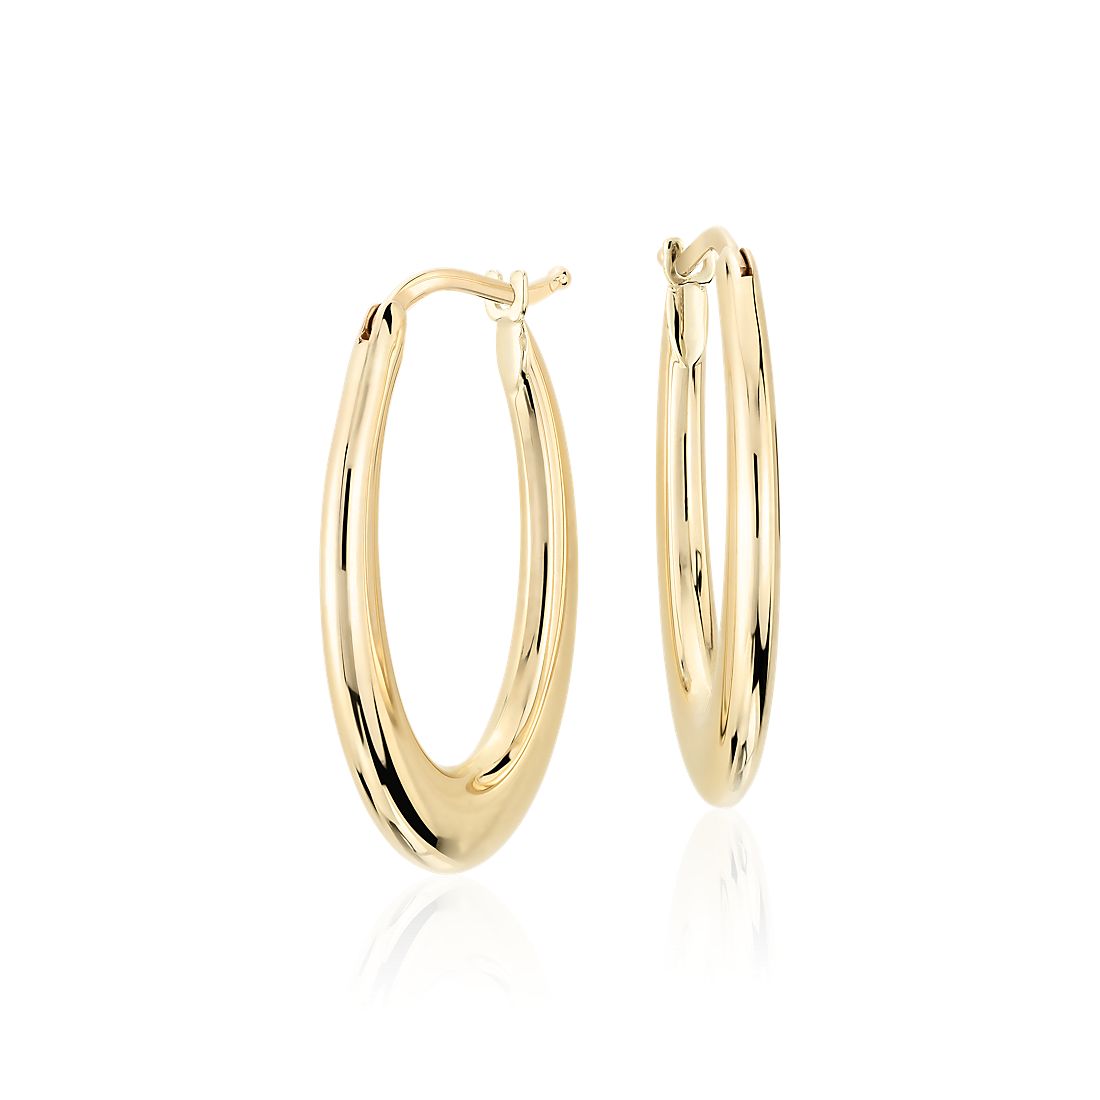 14k Yellow Gold Shiny Oval Shape Free Formform Hoop Earrings With Hinged Clasp Jewelry Gifts for Women